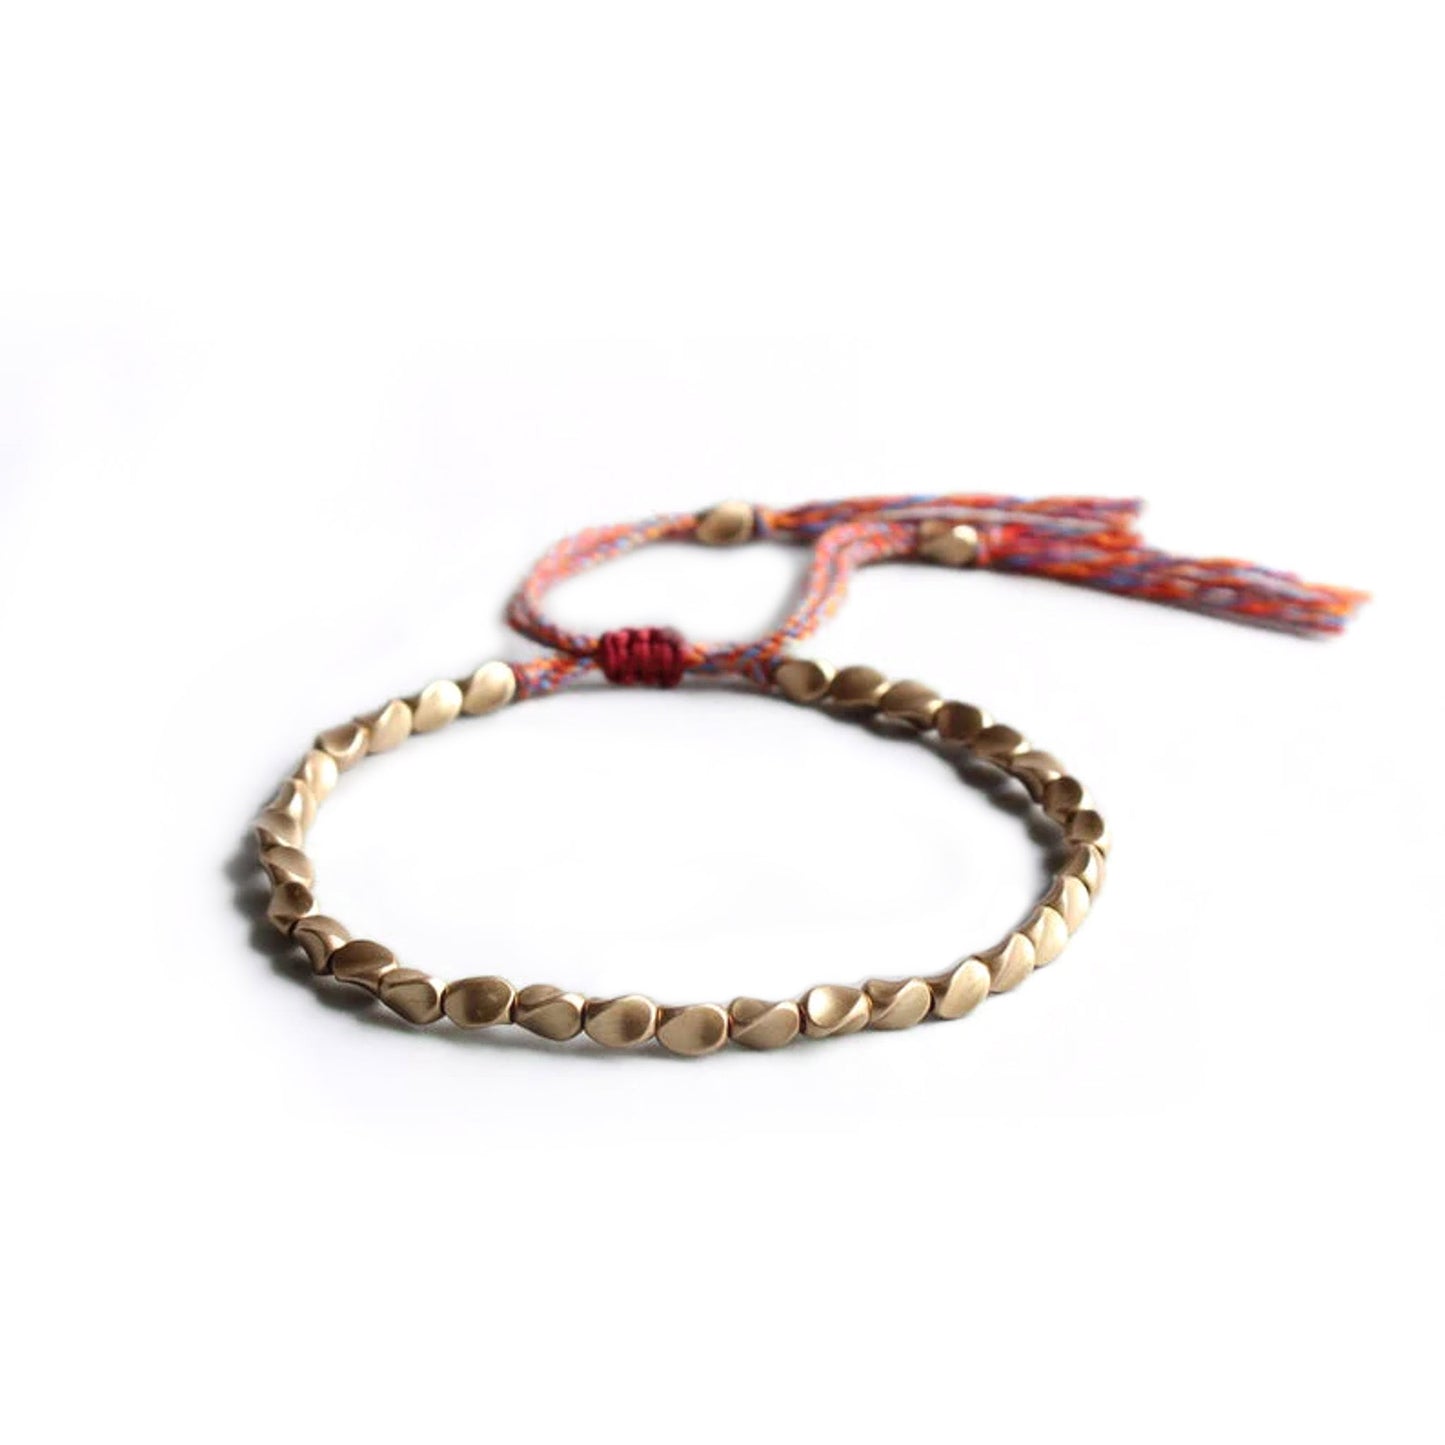 Handcrafted Tibetan Buddhist bracelet with vintage bronze charms